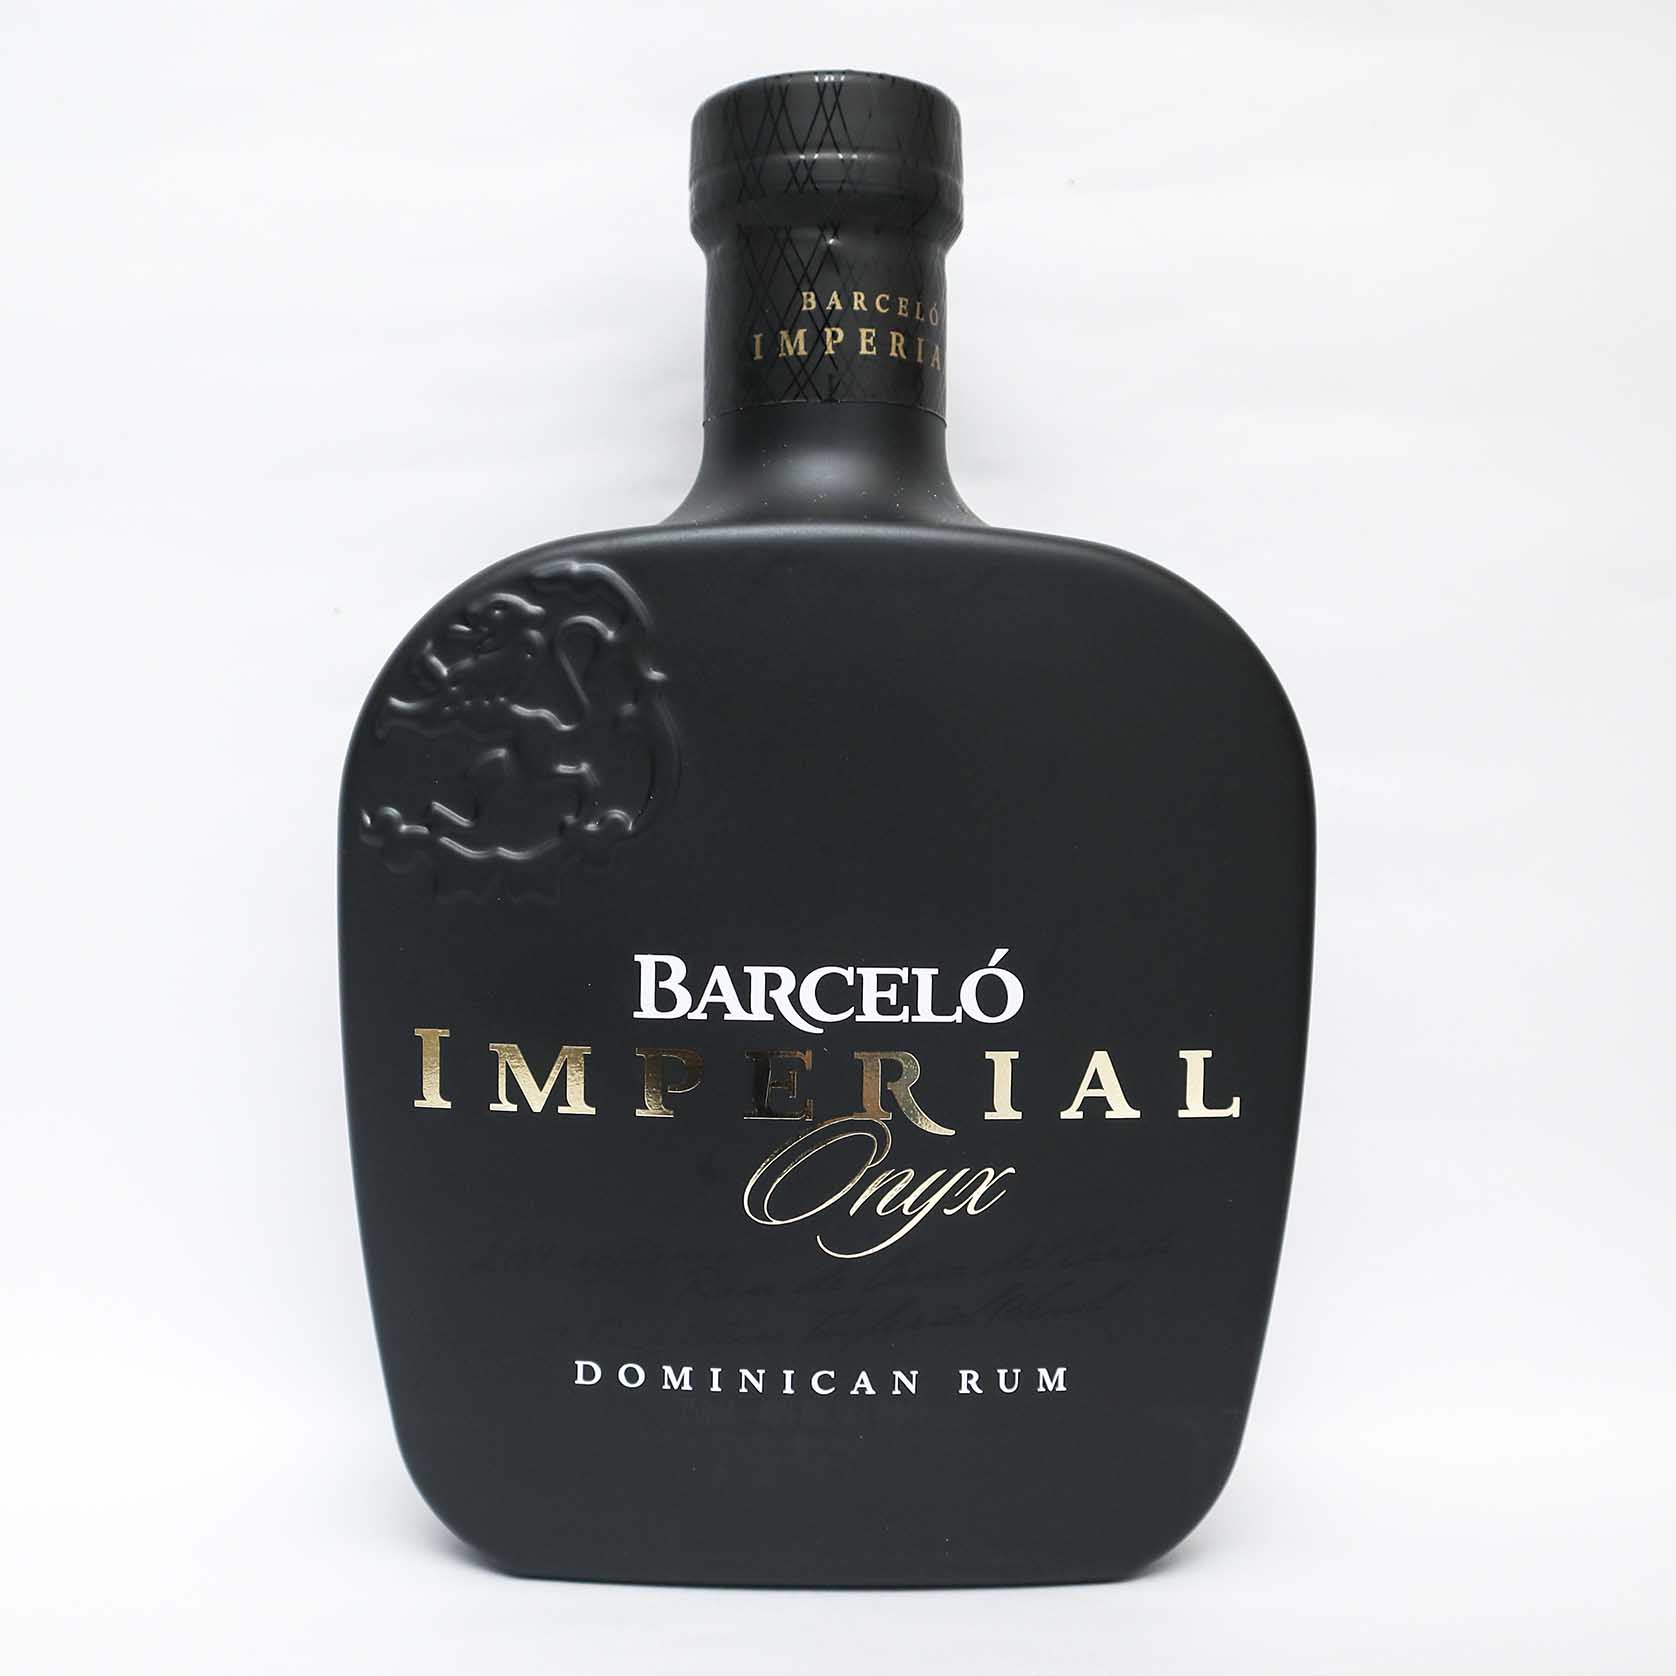 Barcelo Imperial Onyx Ron Dominican Rum 750ml